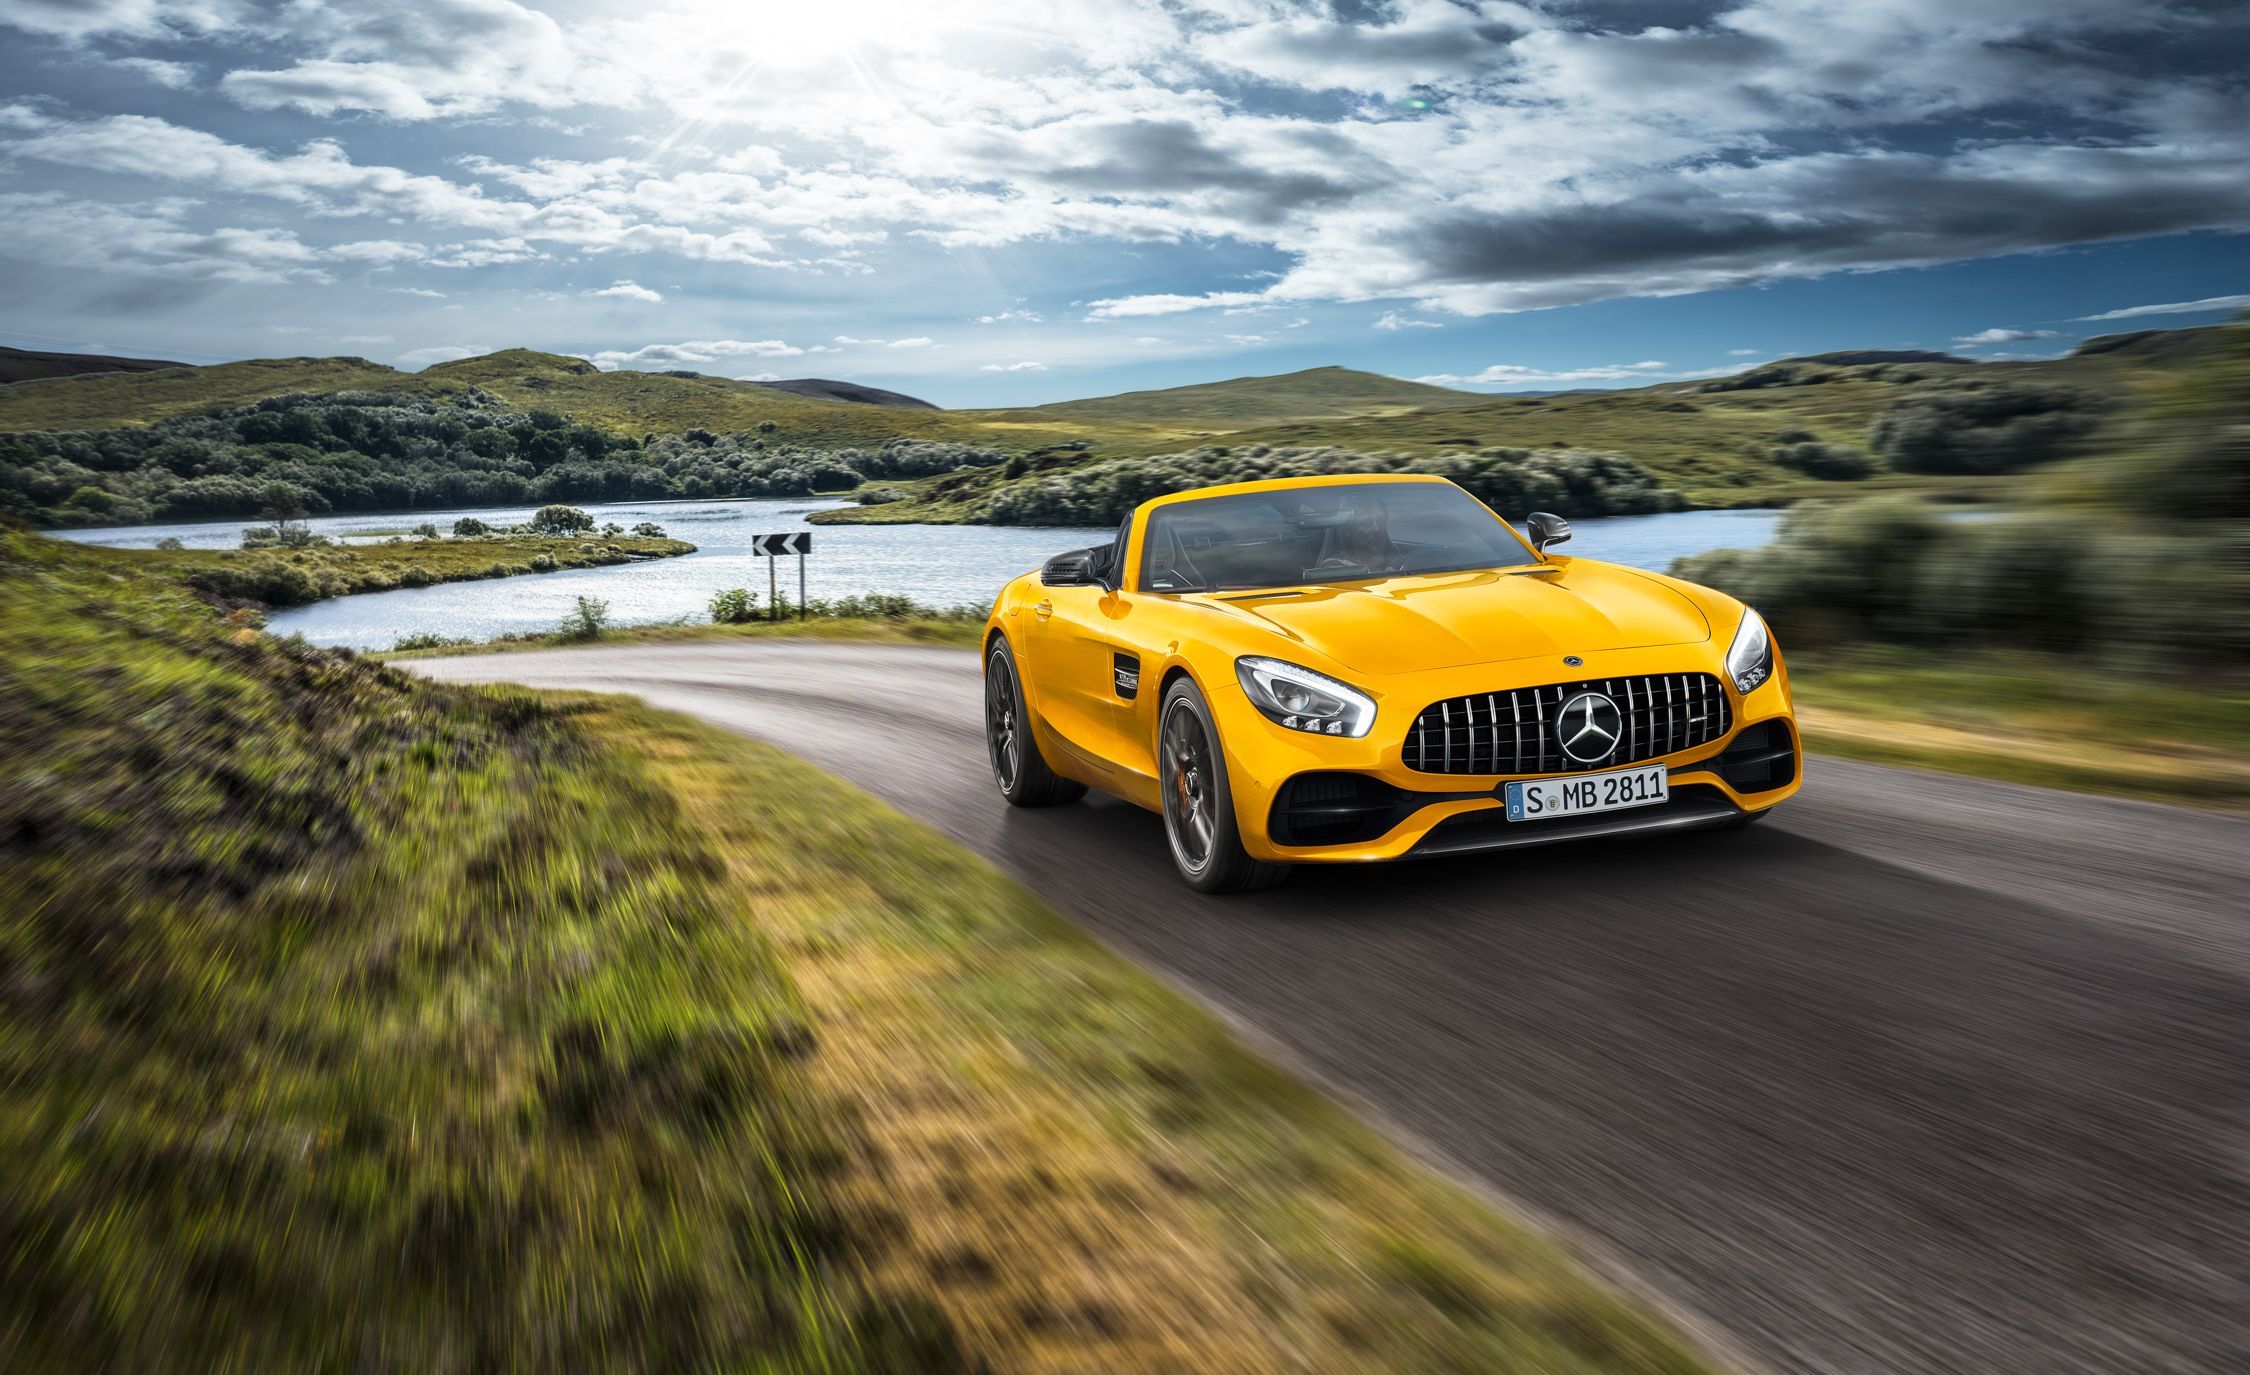 2019 Mercedes-AMG GT S Roadster Introduced | News | Car and Driver